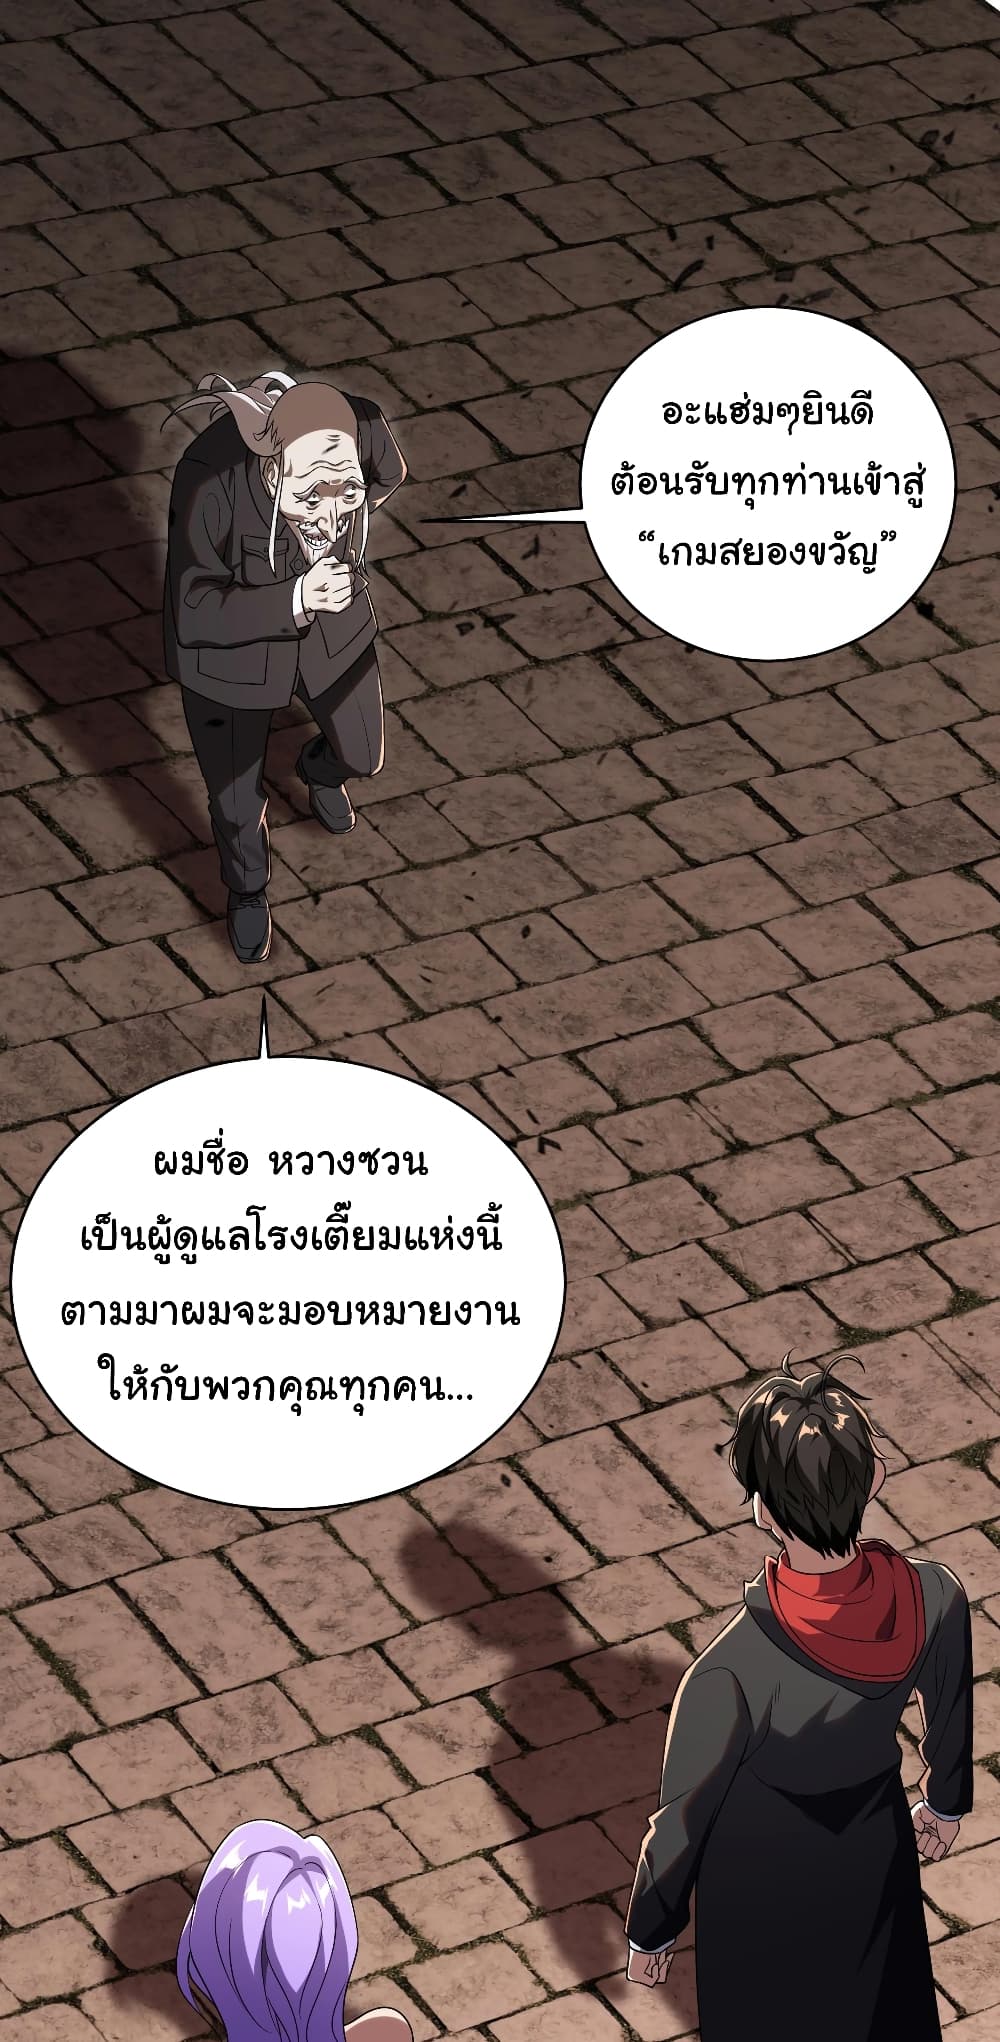 Start with Trillions of Coins ตอนที่ 2 (2)